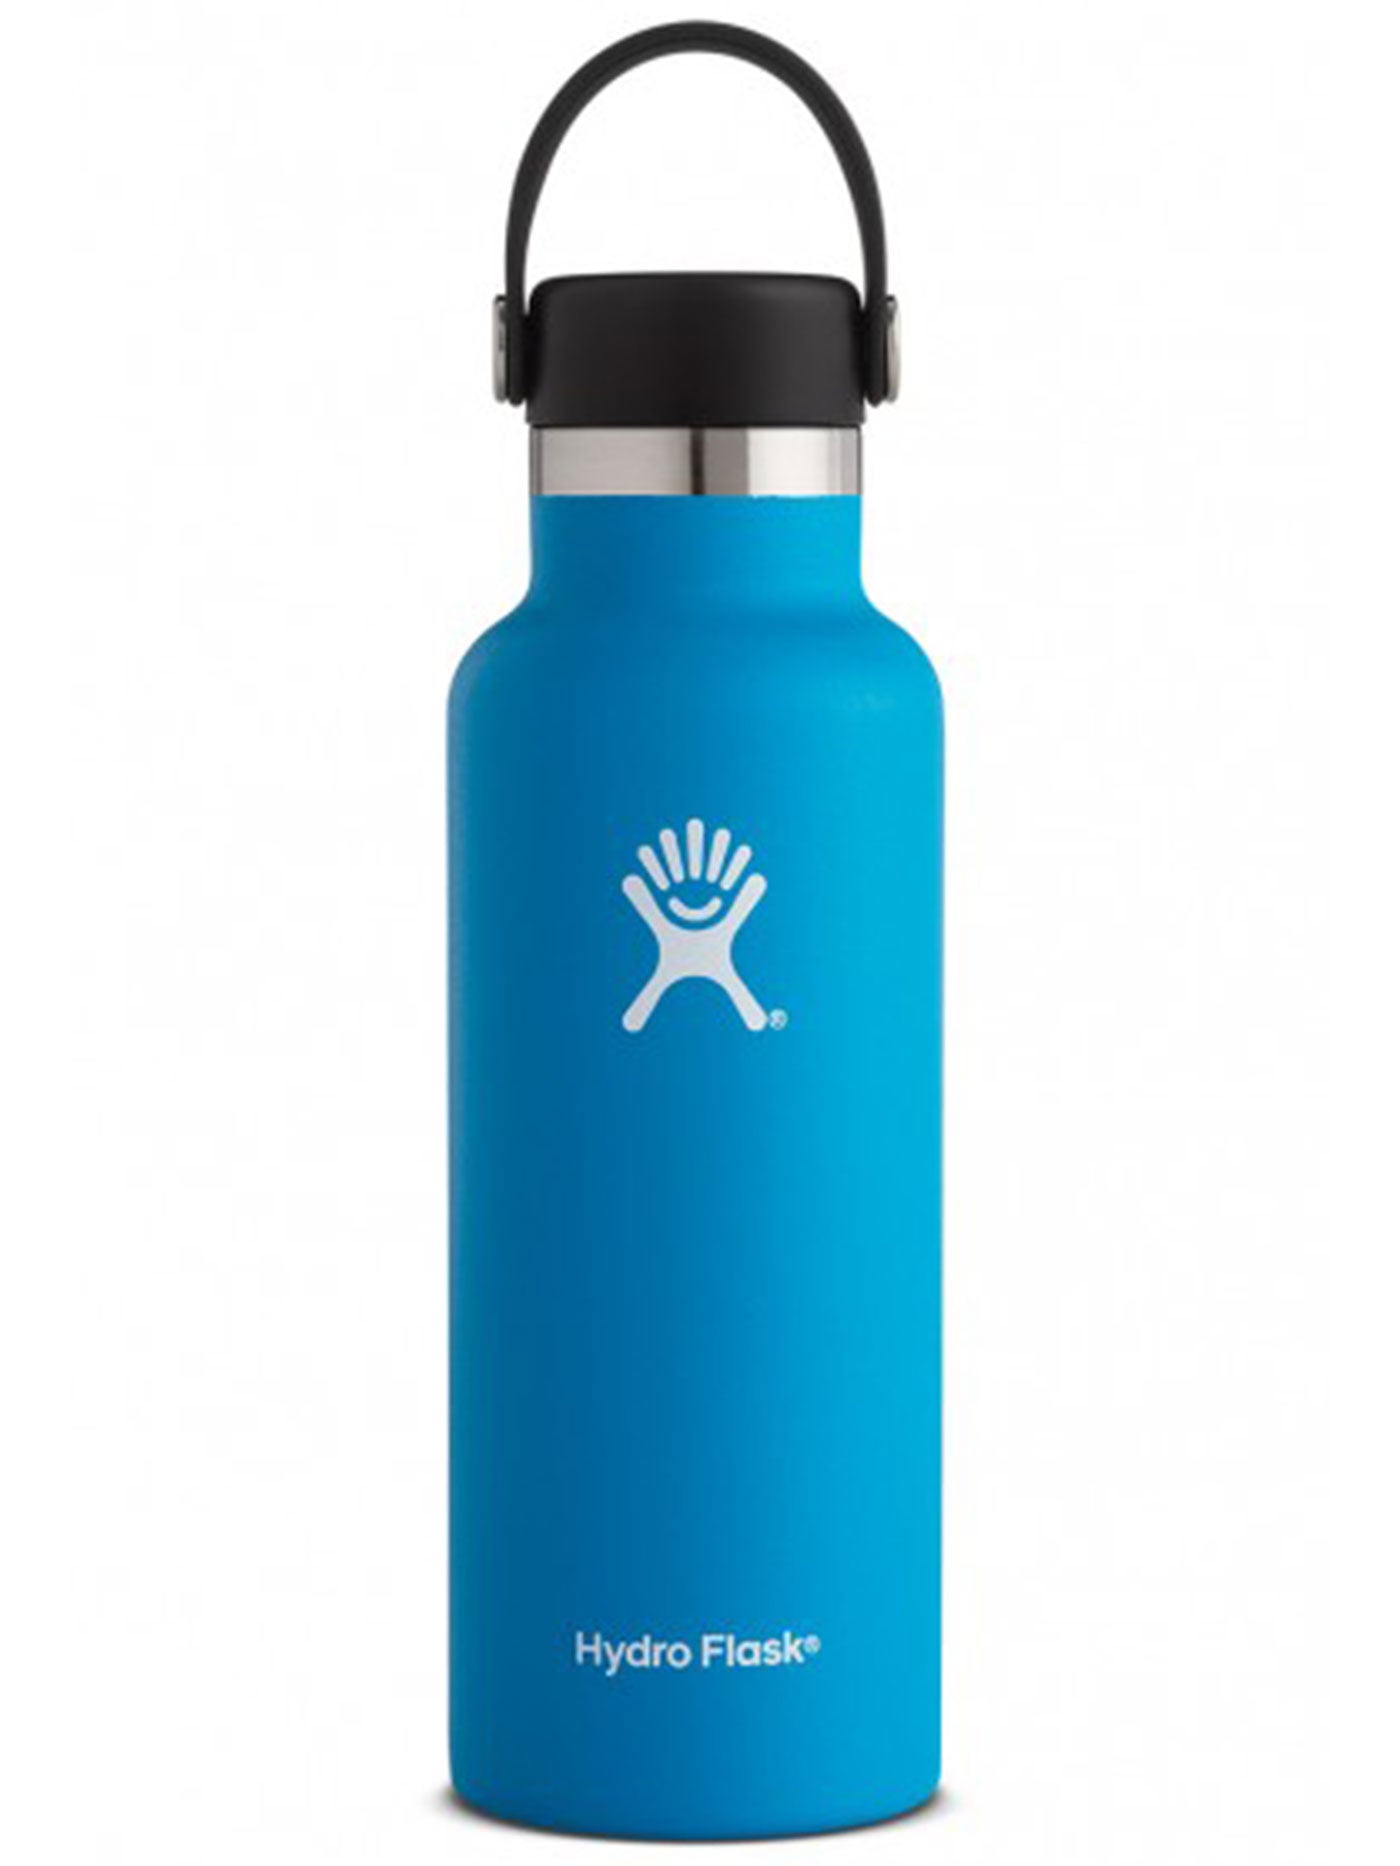 Hydro Flask 18oz Standard Mouth with Flex Cap Pacific Bottle